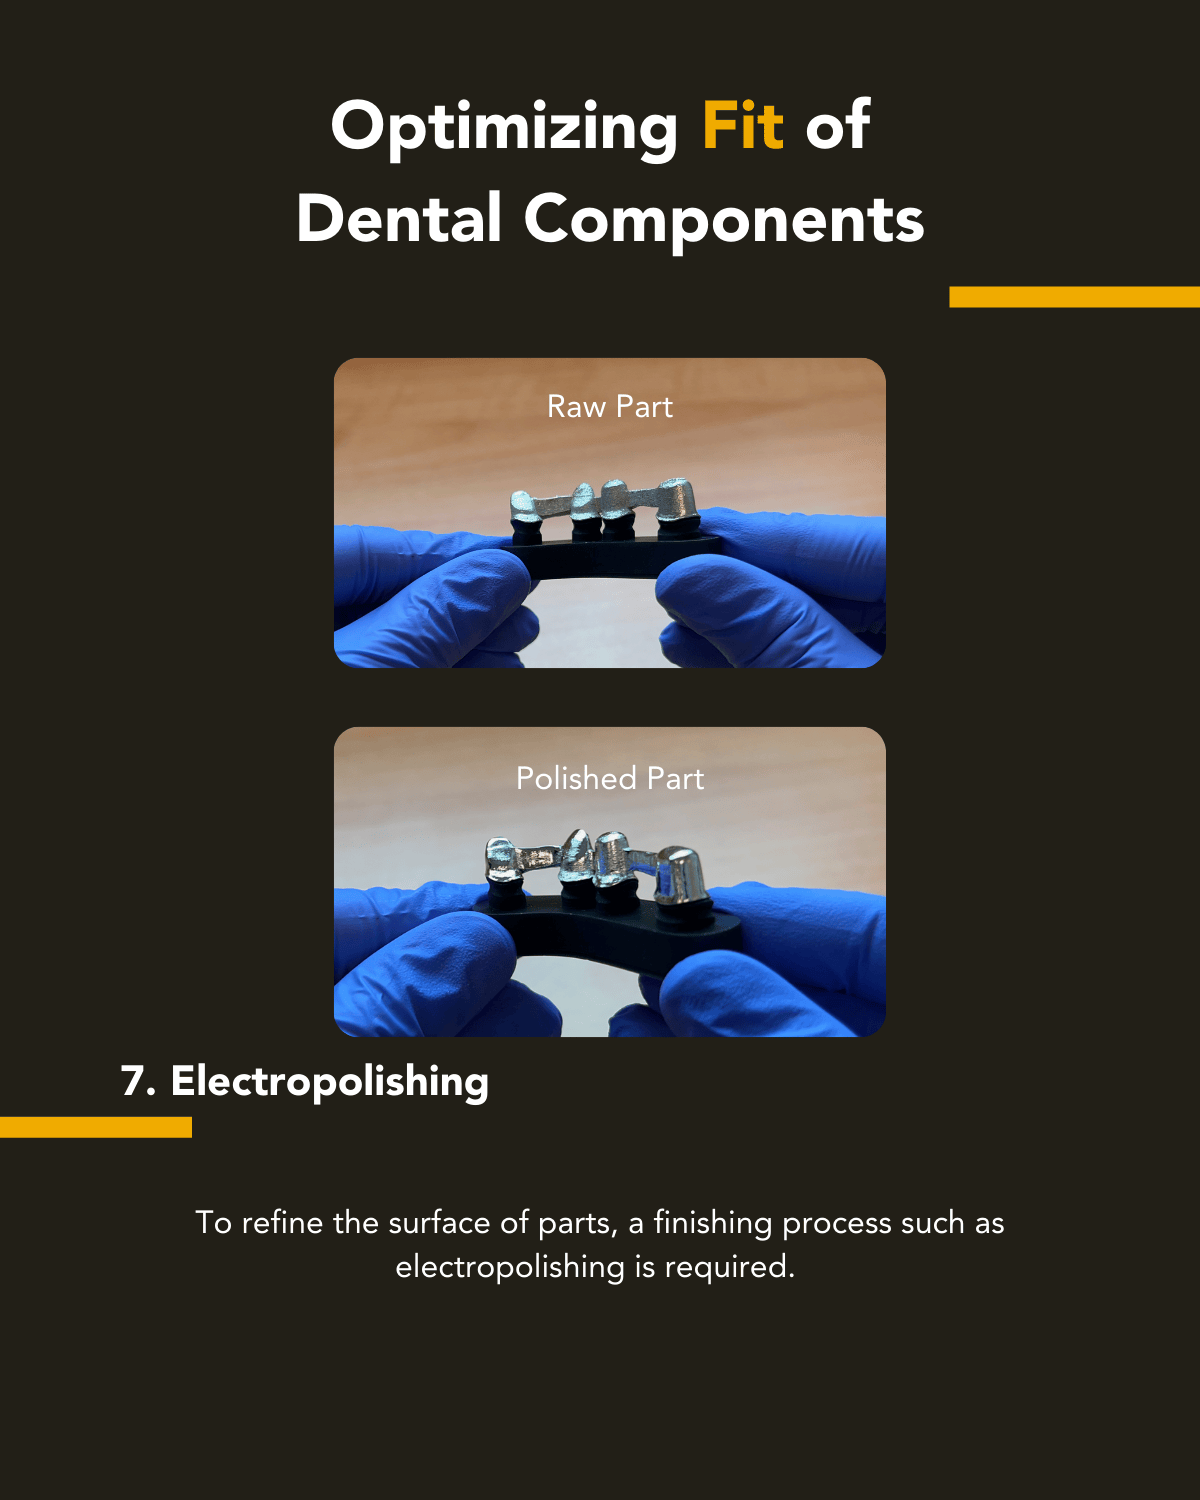 Step Seven in Optimizing dental components for fit: Electropolishing to refine the surface of parts, a finishing process such as electropolishing is required.